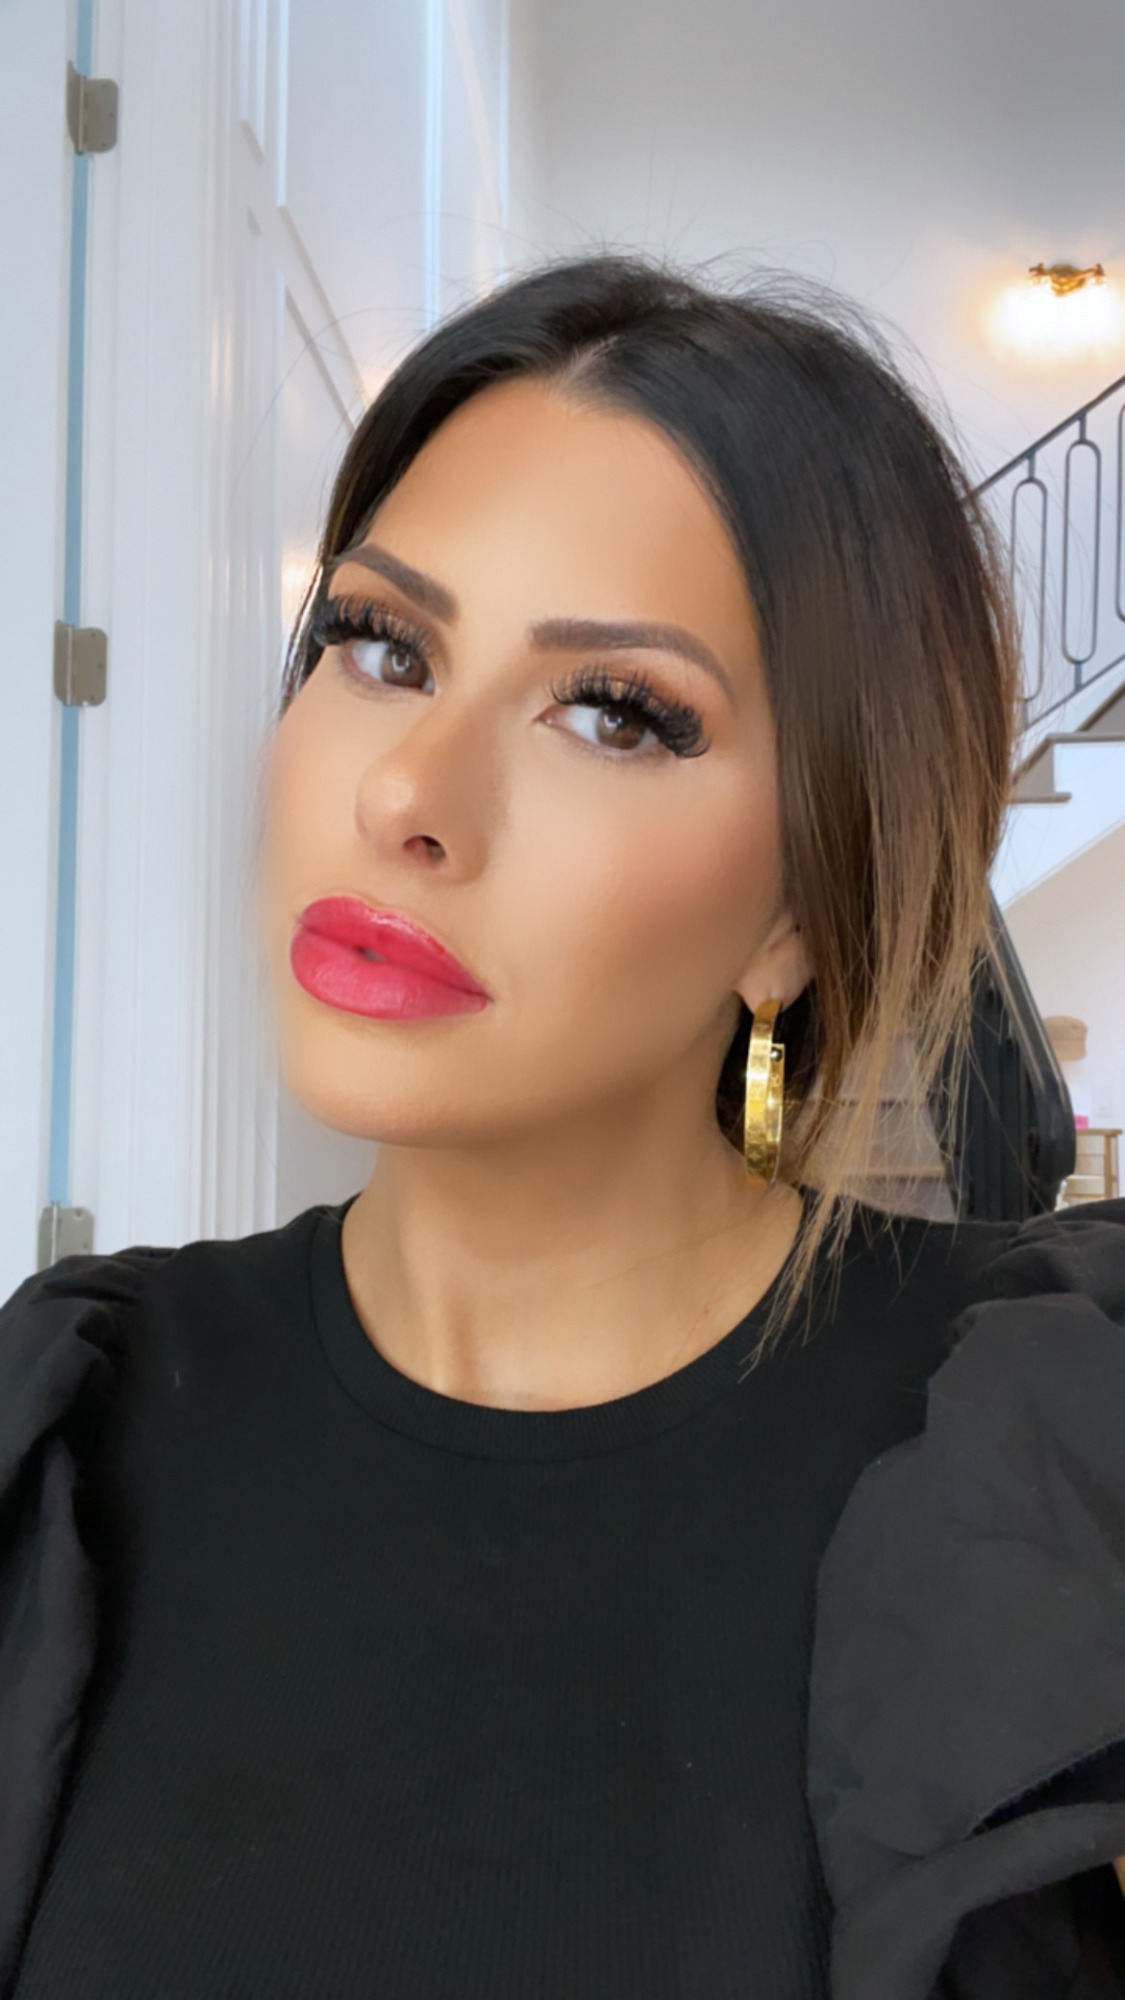 Emily-ann-gemma-makeup-review-ysl-lipstick-ltk-day-sale | June Instagram Recap by popular US fashion blog, The Sweetest Thing: image of Emily Gemma wearing a black shirt, red lipstick, and gold hoop earrings. 